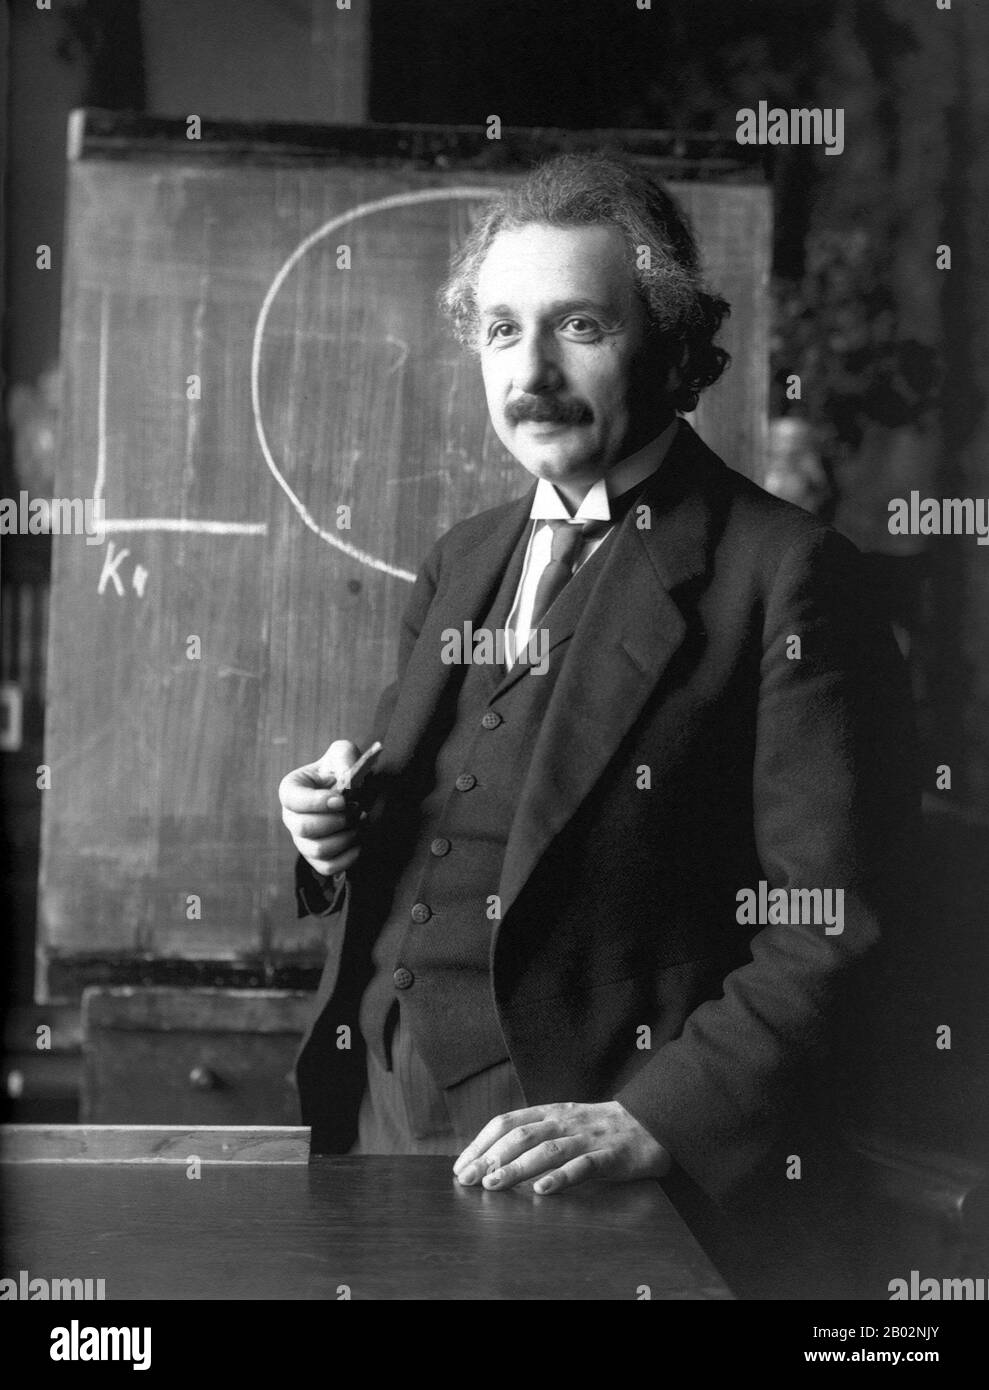 Albert Einstein (14 March 1879 – 18 April 1955) was a German-born theoretical physicist and philosopher of science. He developed the general theory of relativity, one of the two pillars of modern physics (alongside quantum mechanics). He is best known in popular culture for his mass–energy equivalence formula E = mc2 (which has been dubbed 'the world's most famous equation'). He received the 1921 Nobel Prize in Physics 'for his services to theoretical physics, and especially for his discovery of the law of the photoelectric effect'. The latter was pivotal in establishing quantum theory.  Einst Stock Photo